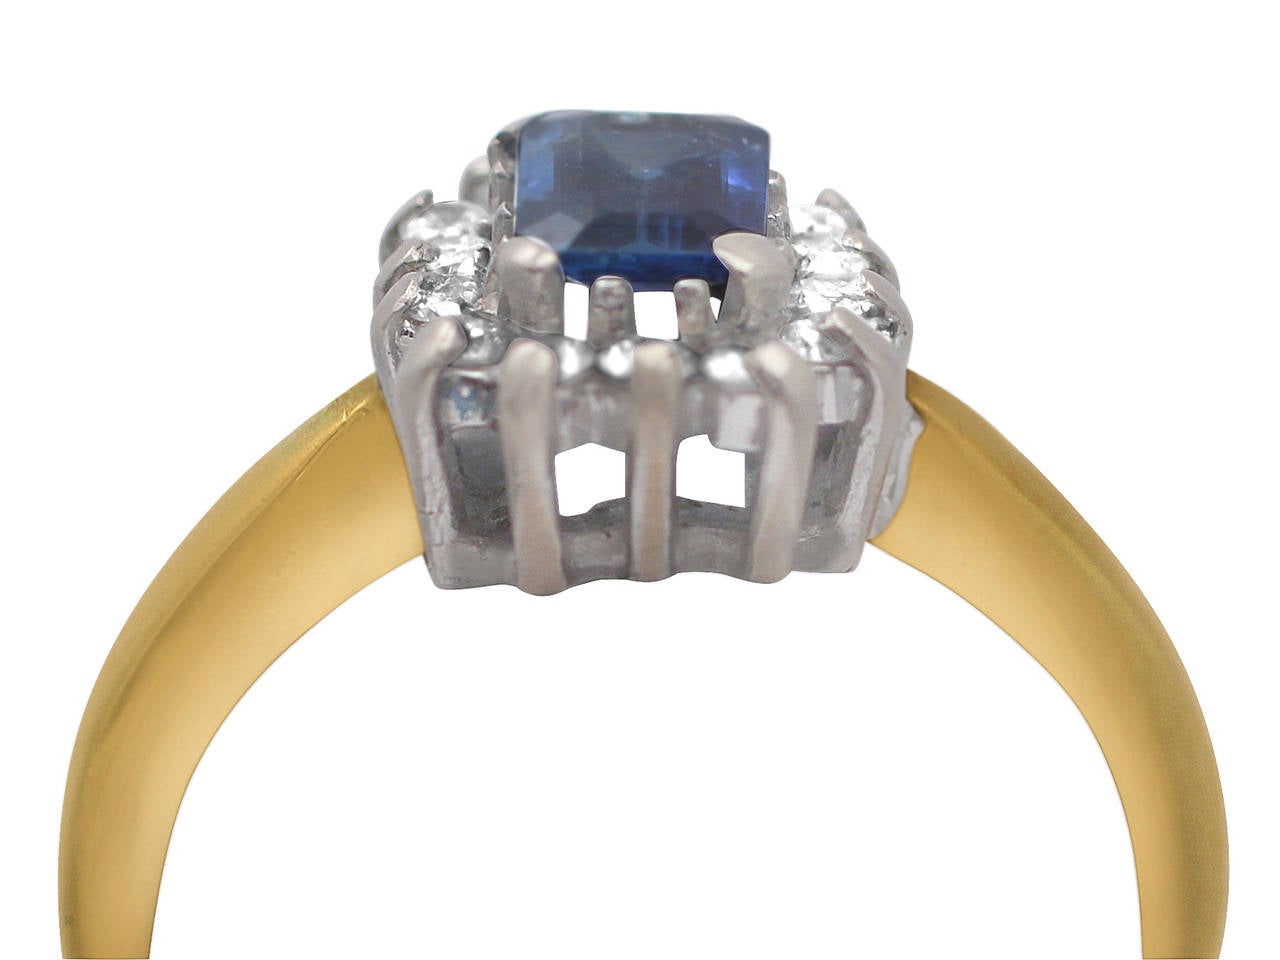 A very good vintage 0.48 carat natural blue sapphire and 0.35 carat diamond, 18 karat yellow gold, platinum set cluster ring; part of our vintage jewelry/estate jewelry collections

This vintage sapphire and diamond ring has been crafted in 18k